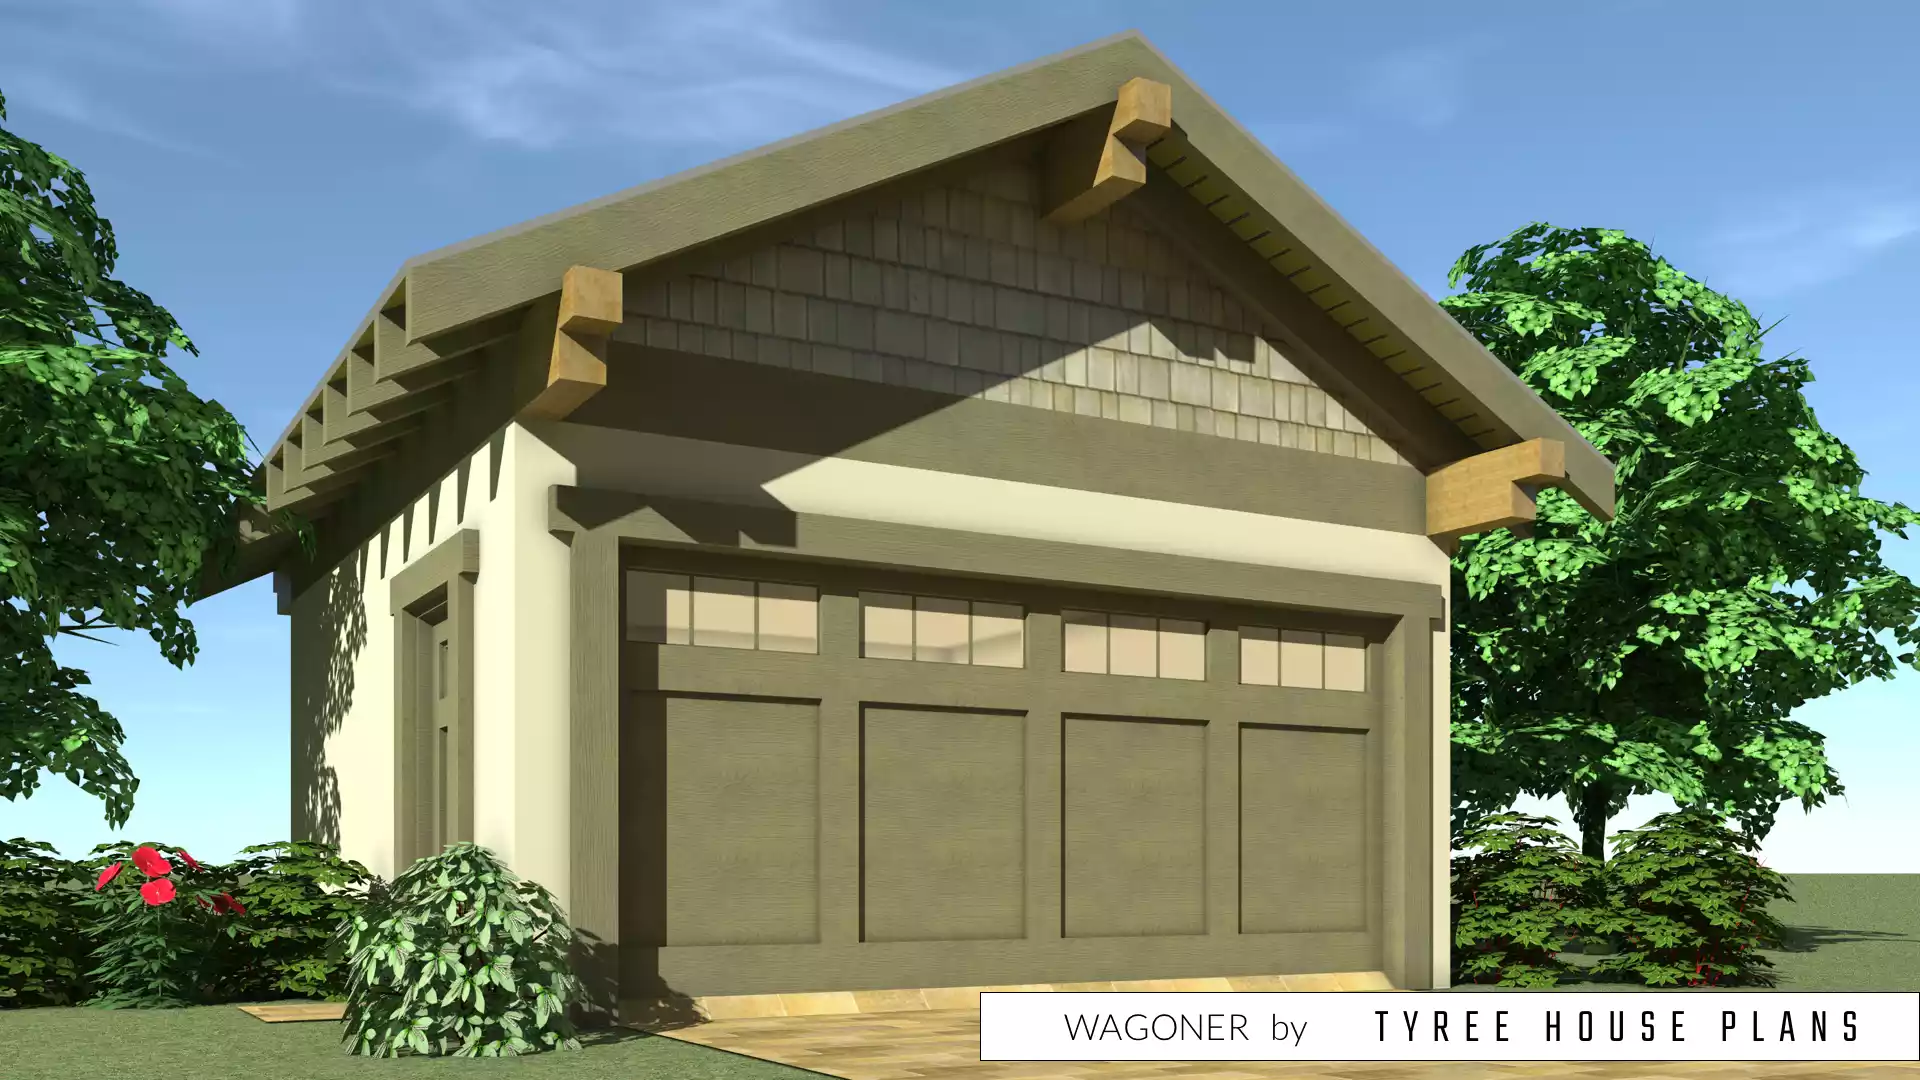 Detached garage. Wagoner by Tyree House Plans.